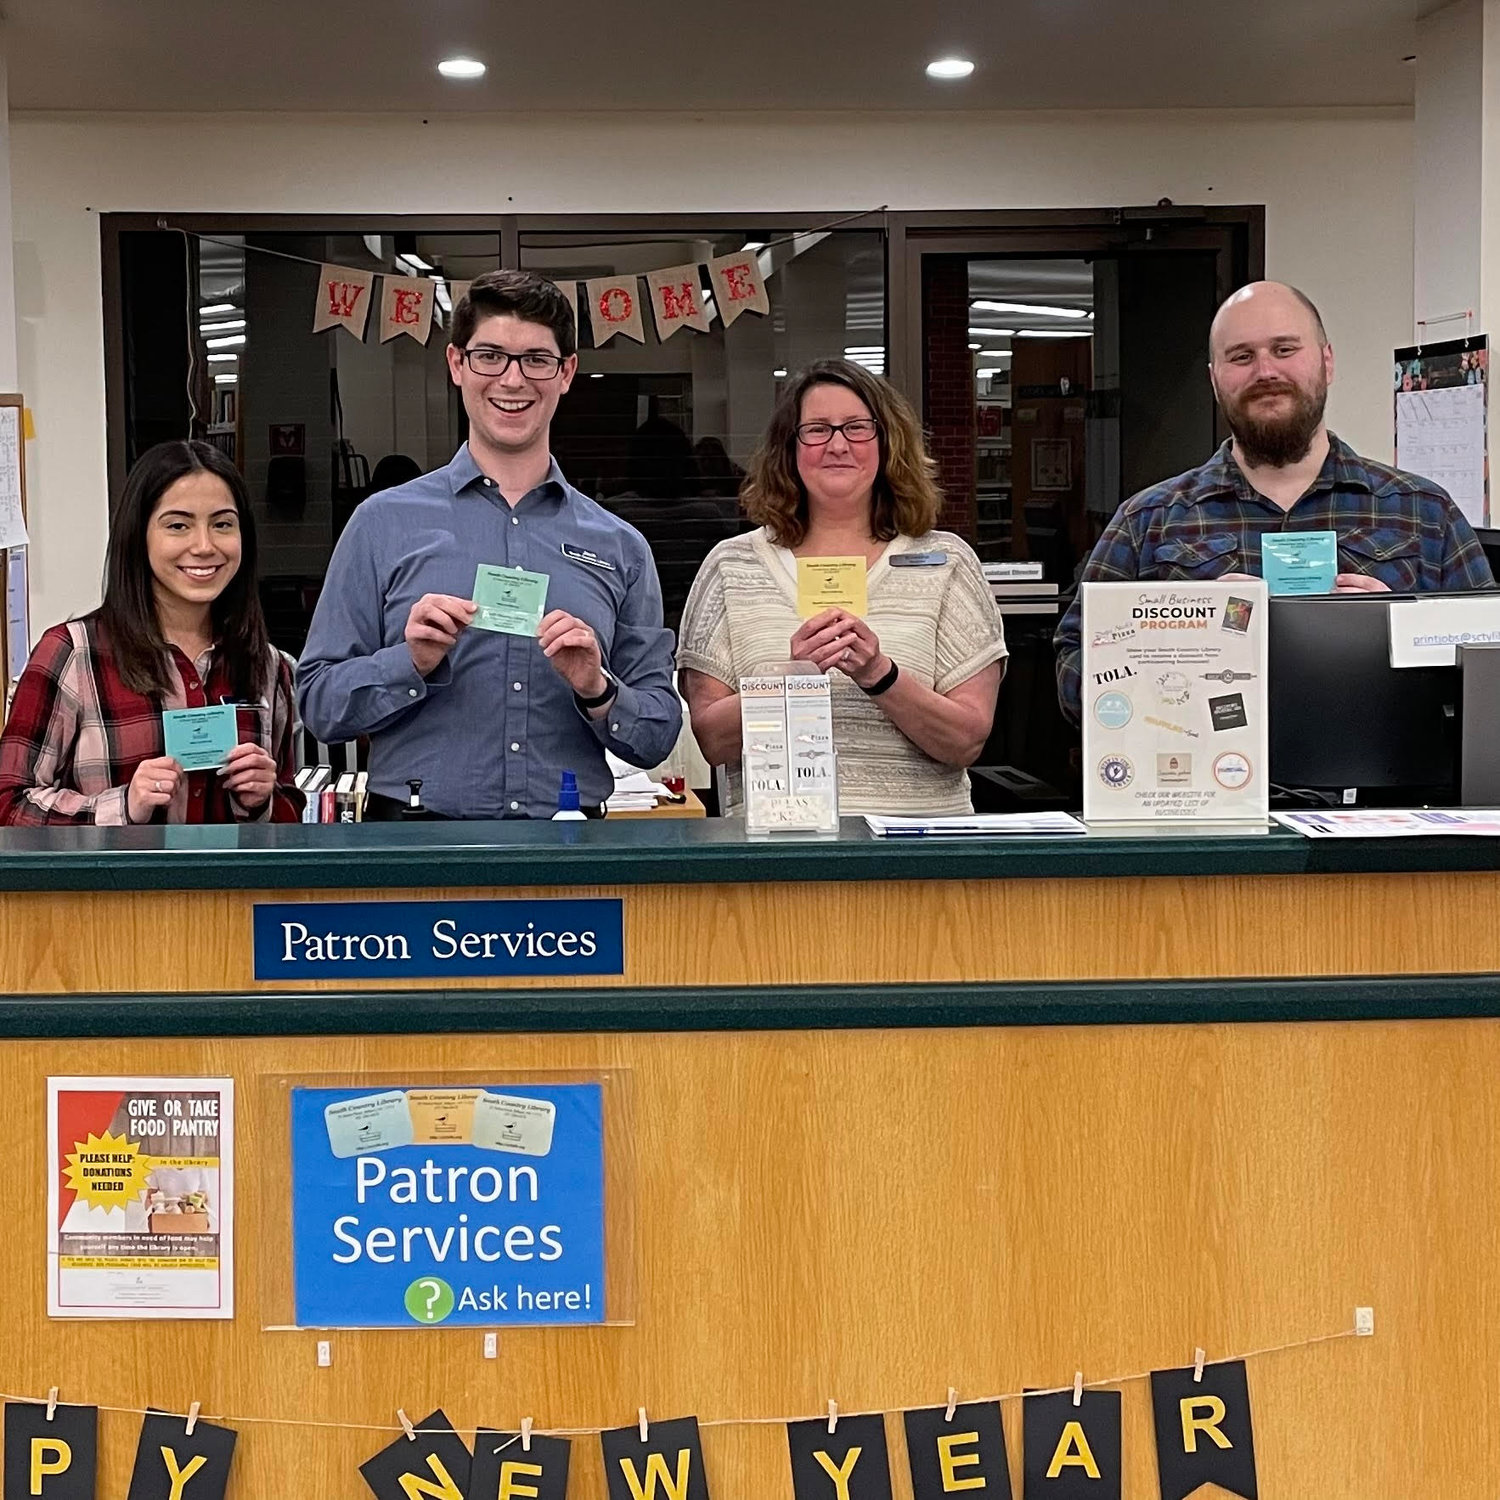 Here are some of the members of the helpful South Country library staff: (left to right) Marcia Bolanos Buestan (patron services), Jack Nix (community engagement librarian), Kristina Sembler (library director), and Joshua Kelvas (patron services).